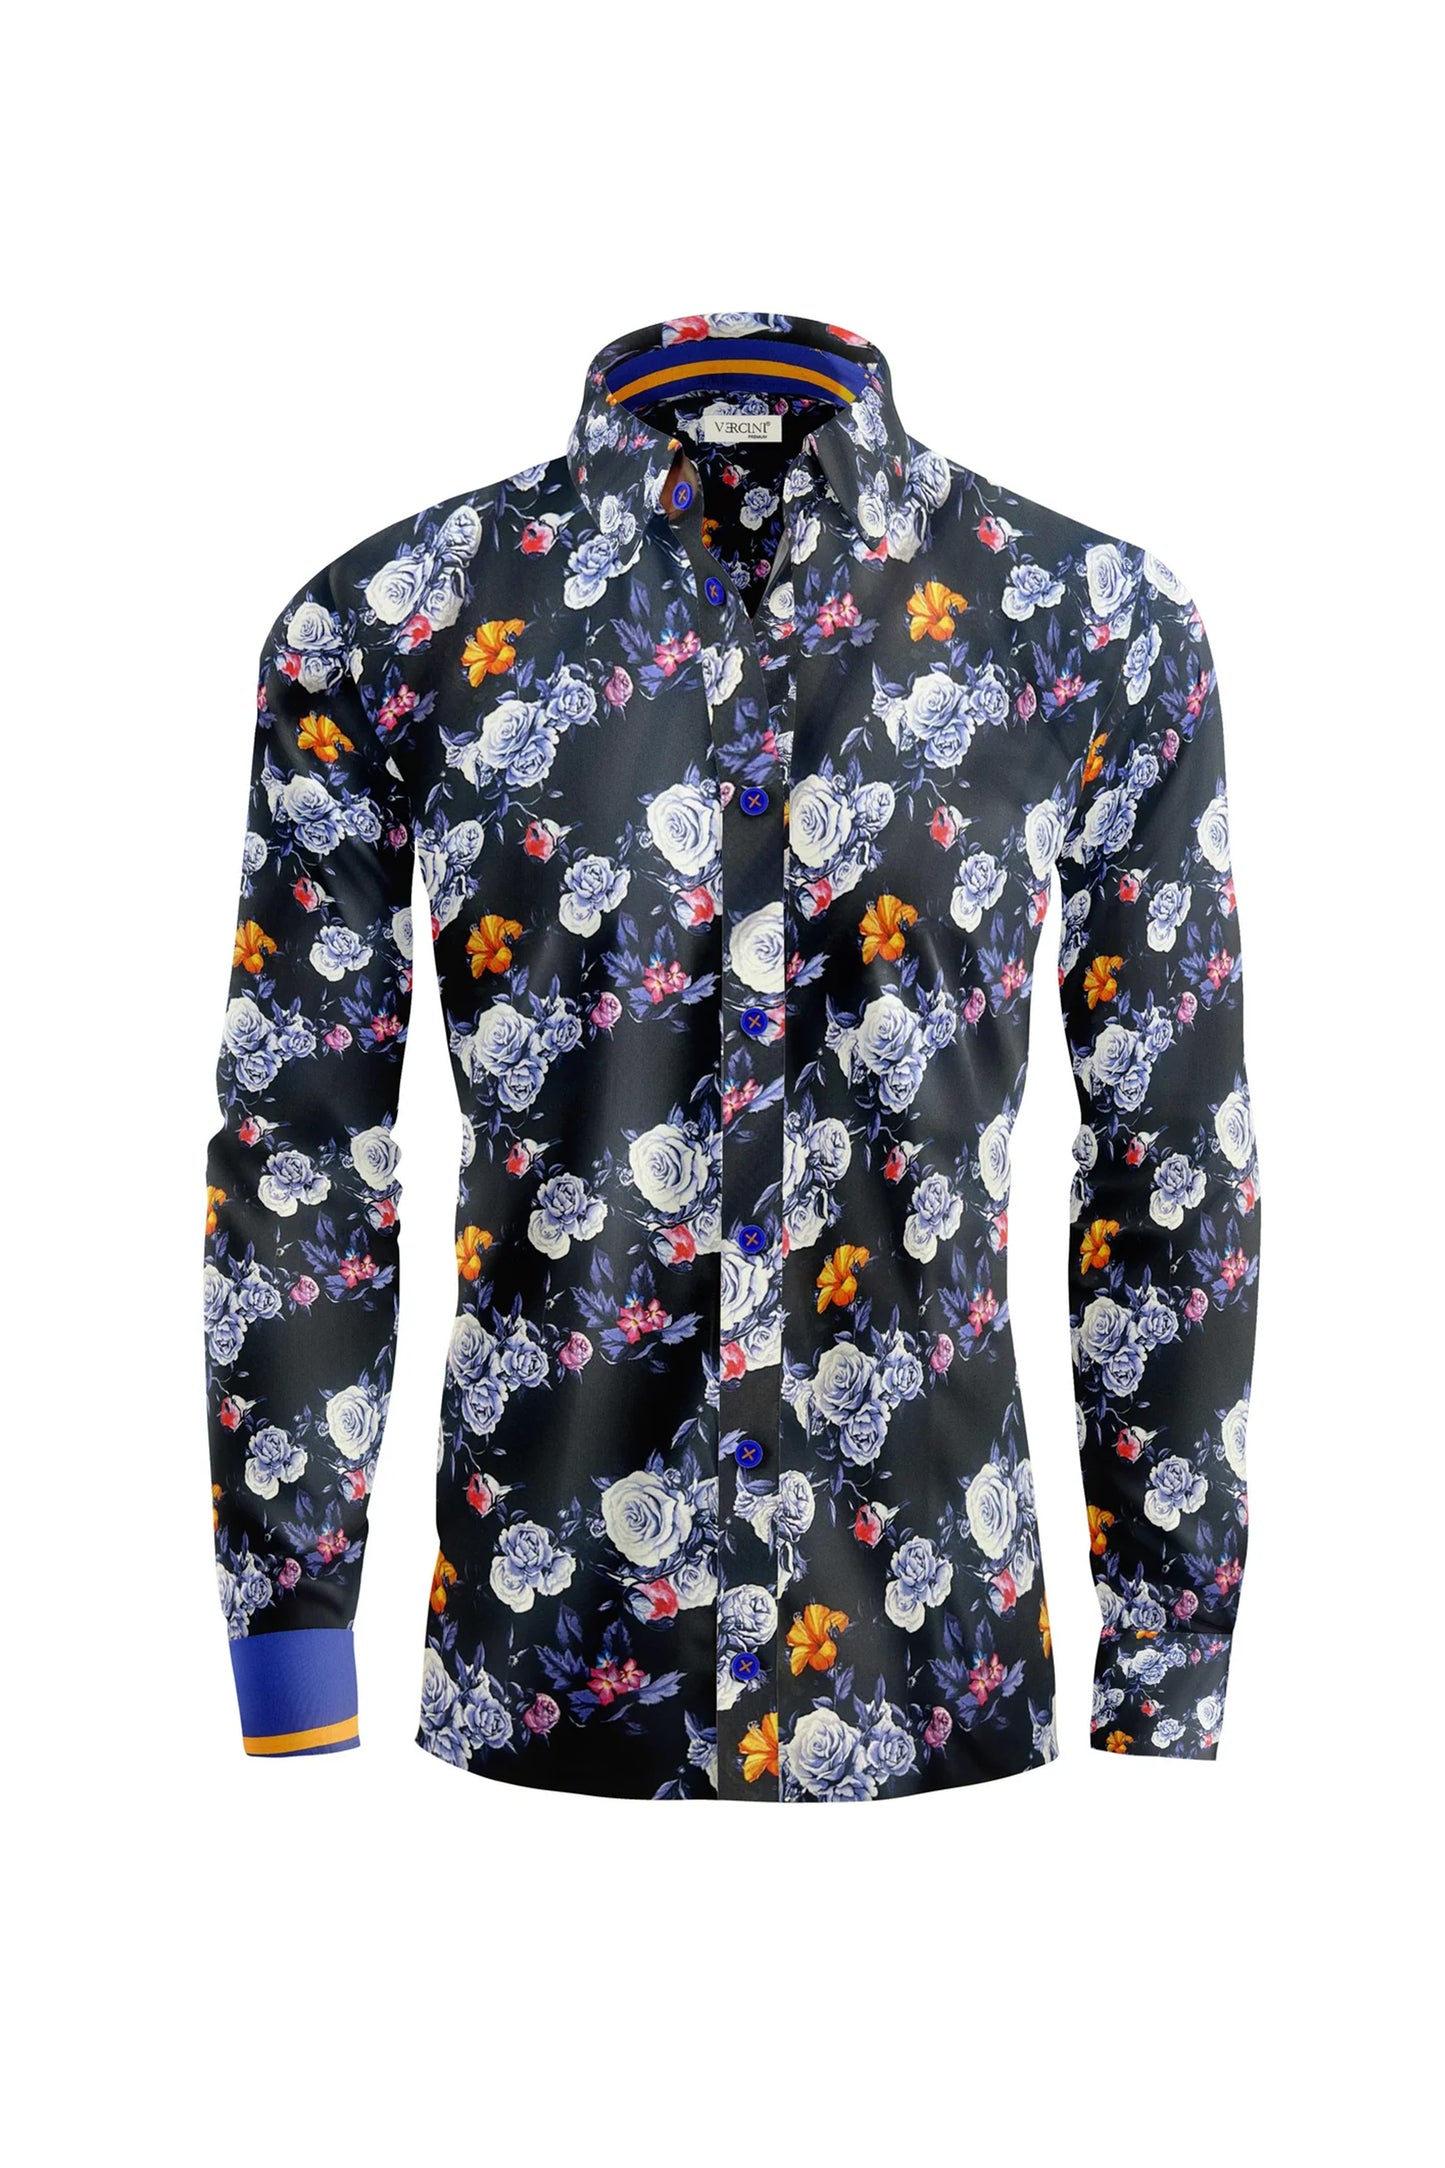 Midnight Blossom Fitted Dress Shirt CASUAL SHIRT On Sale 30% Off Vercini